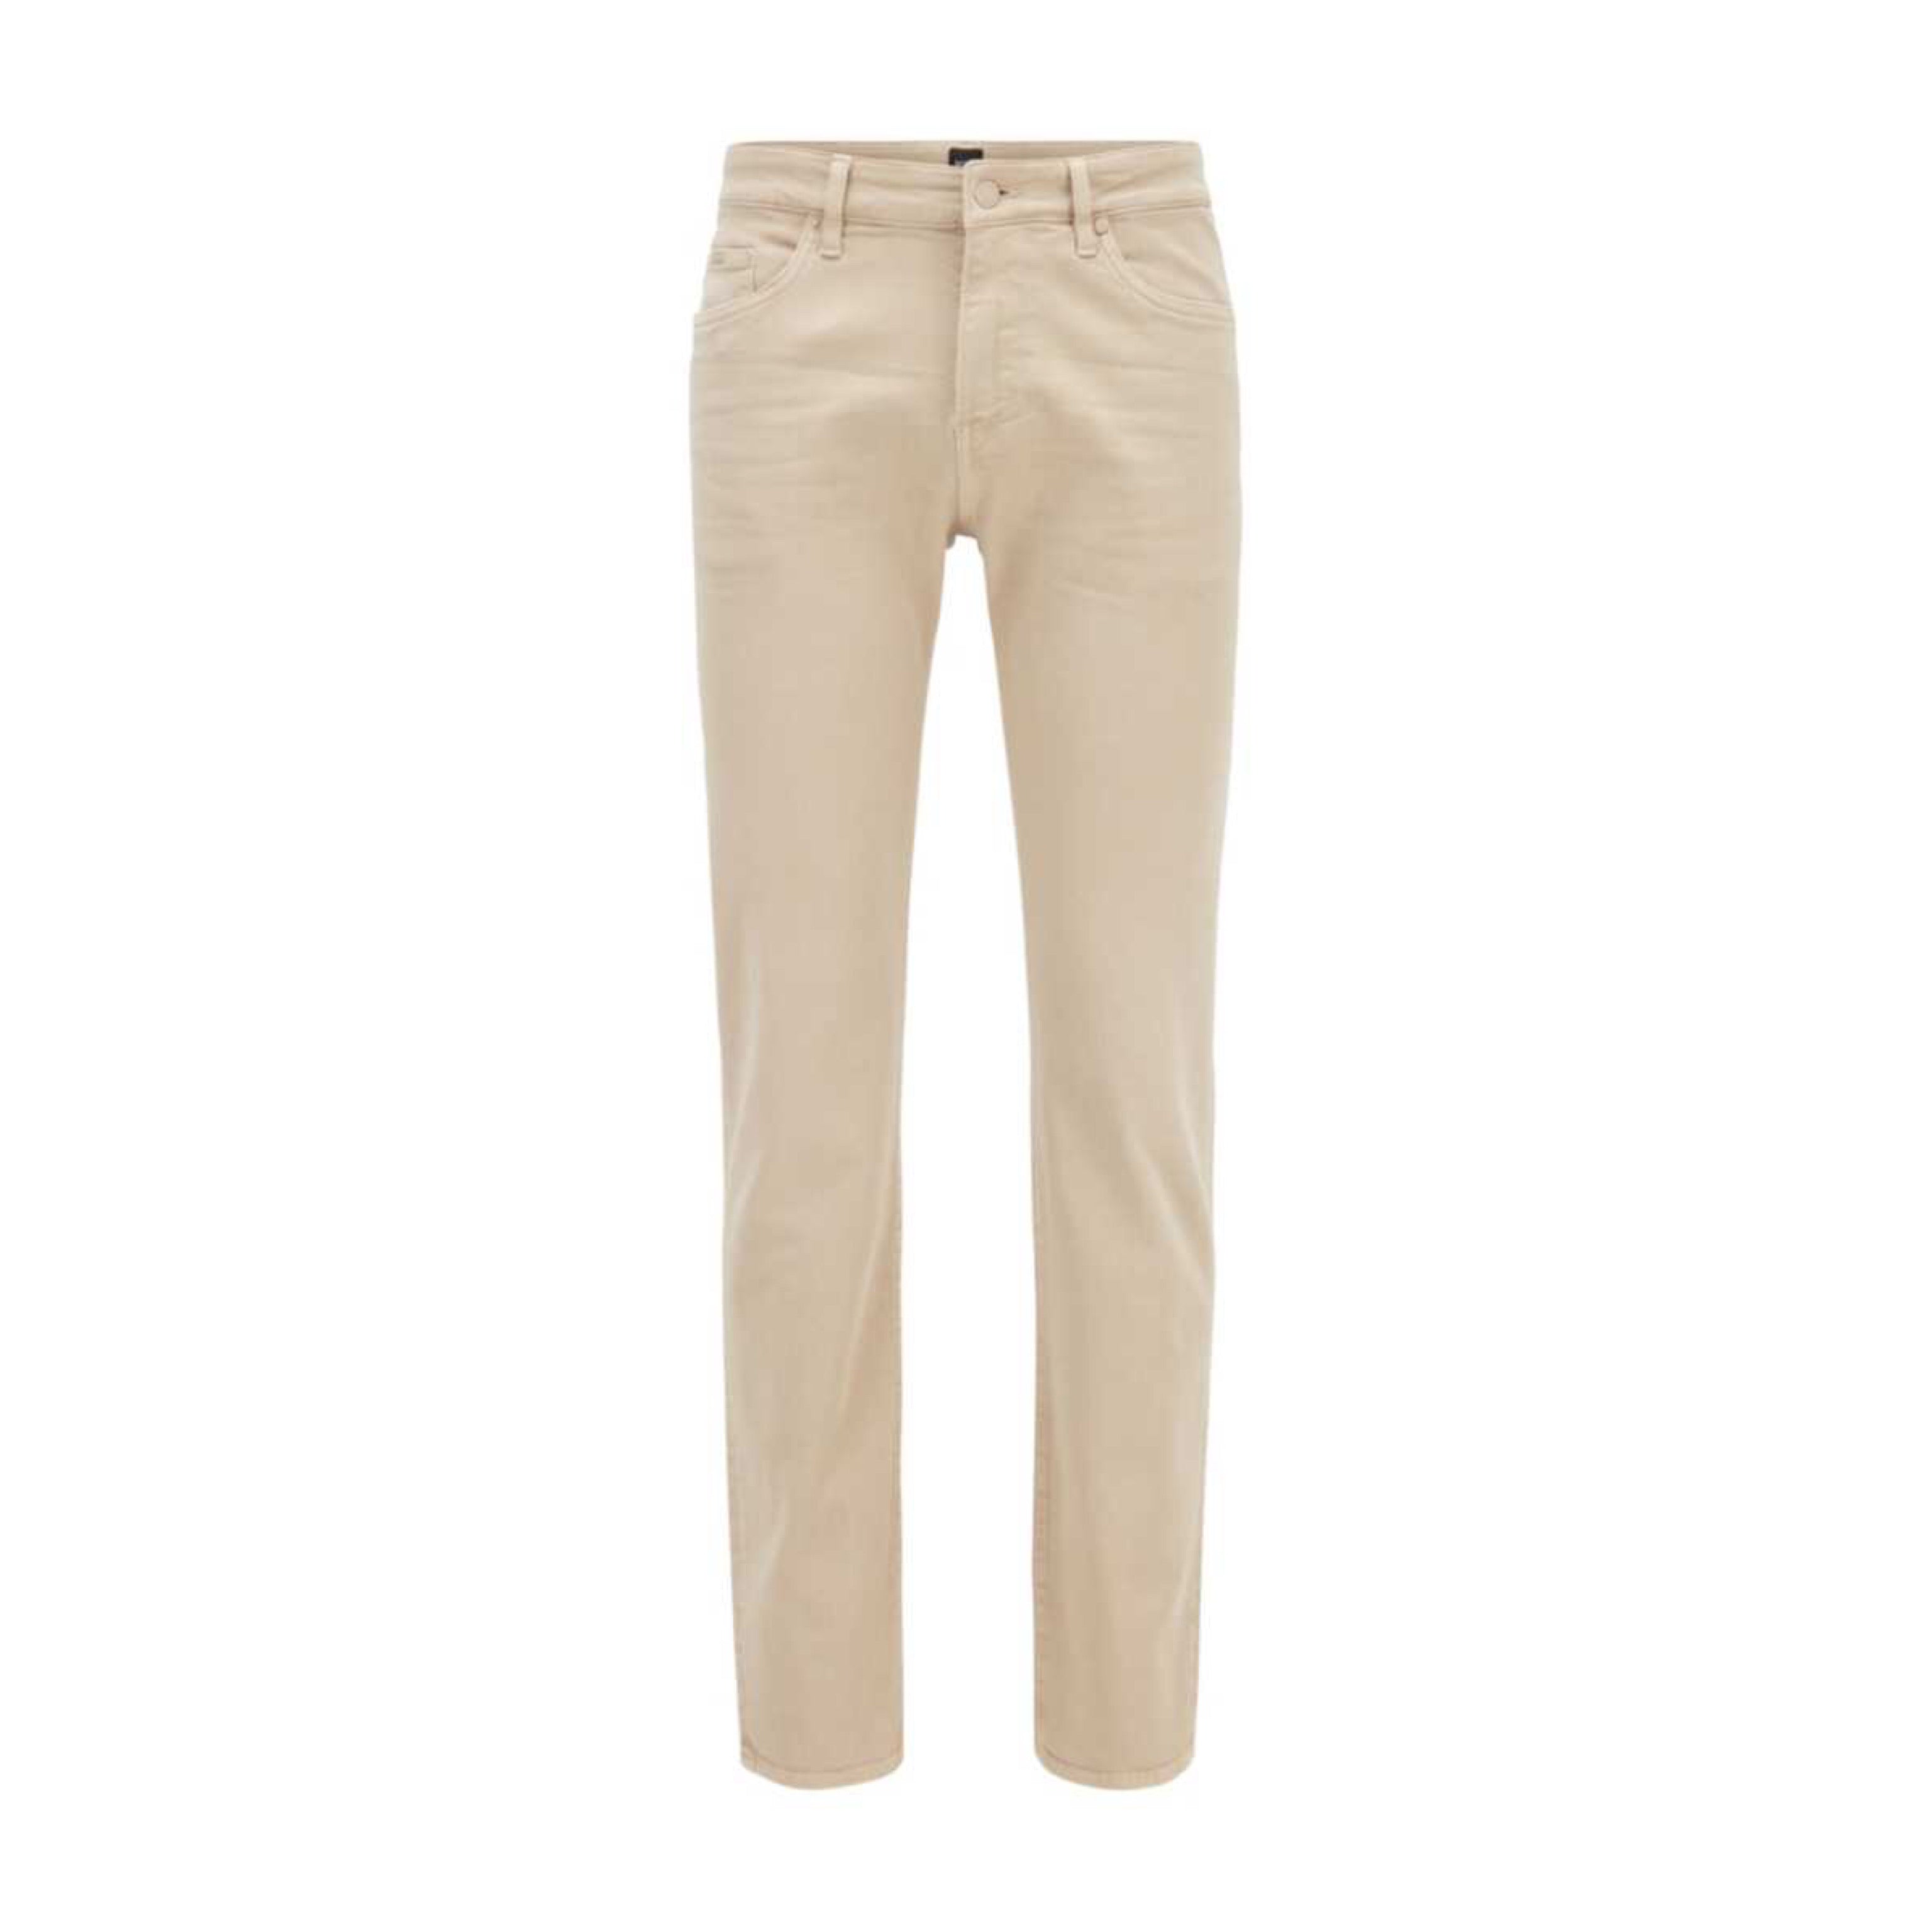 The Everyday Beige Denim Pant - Up to Size 42